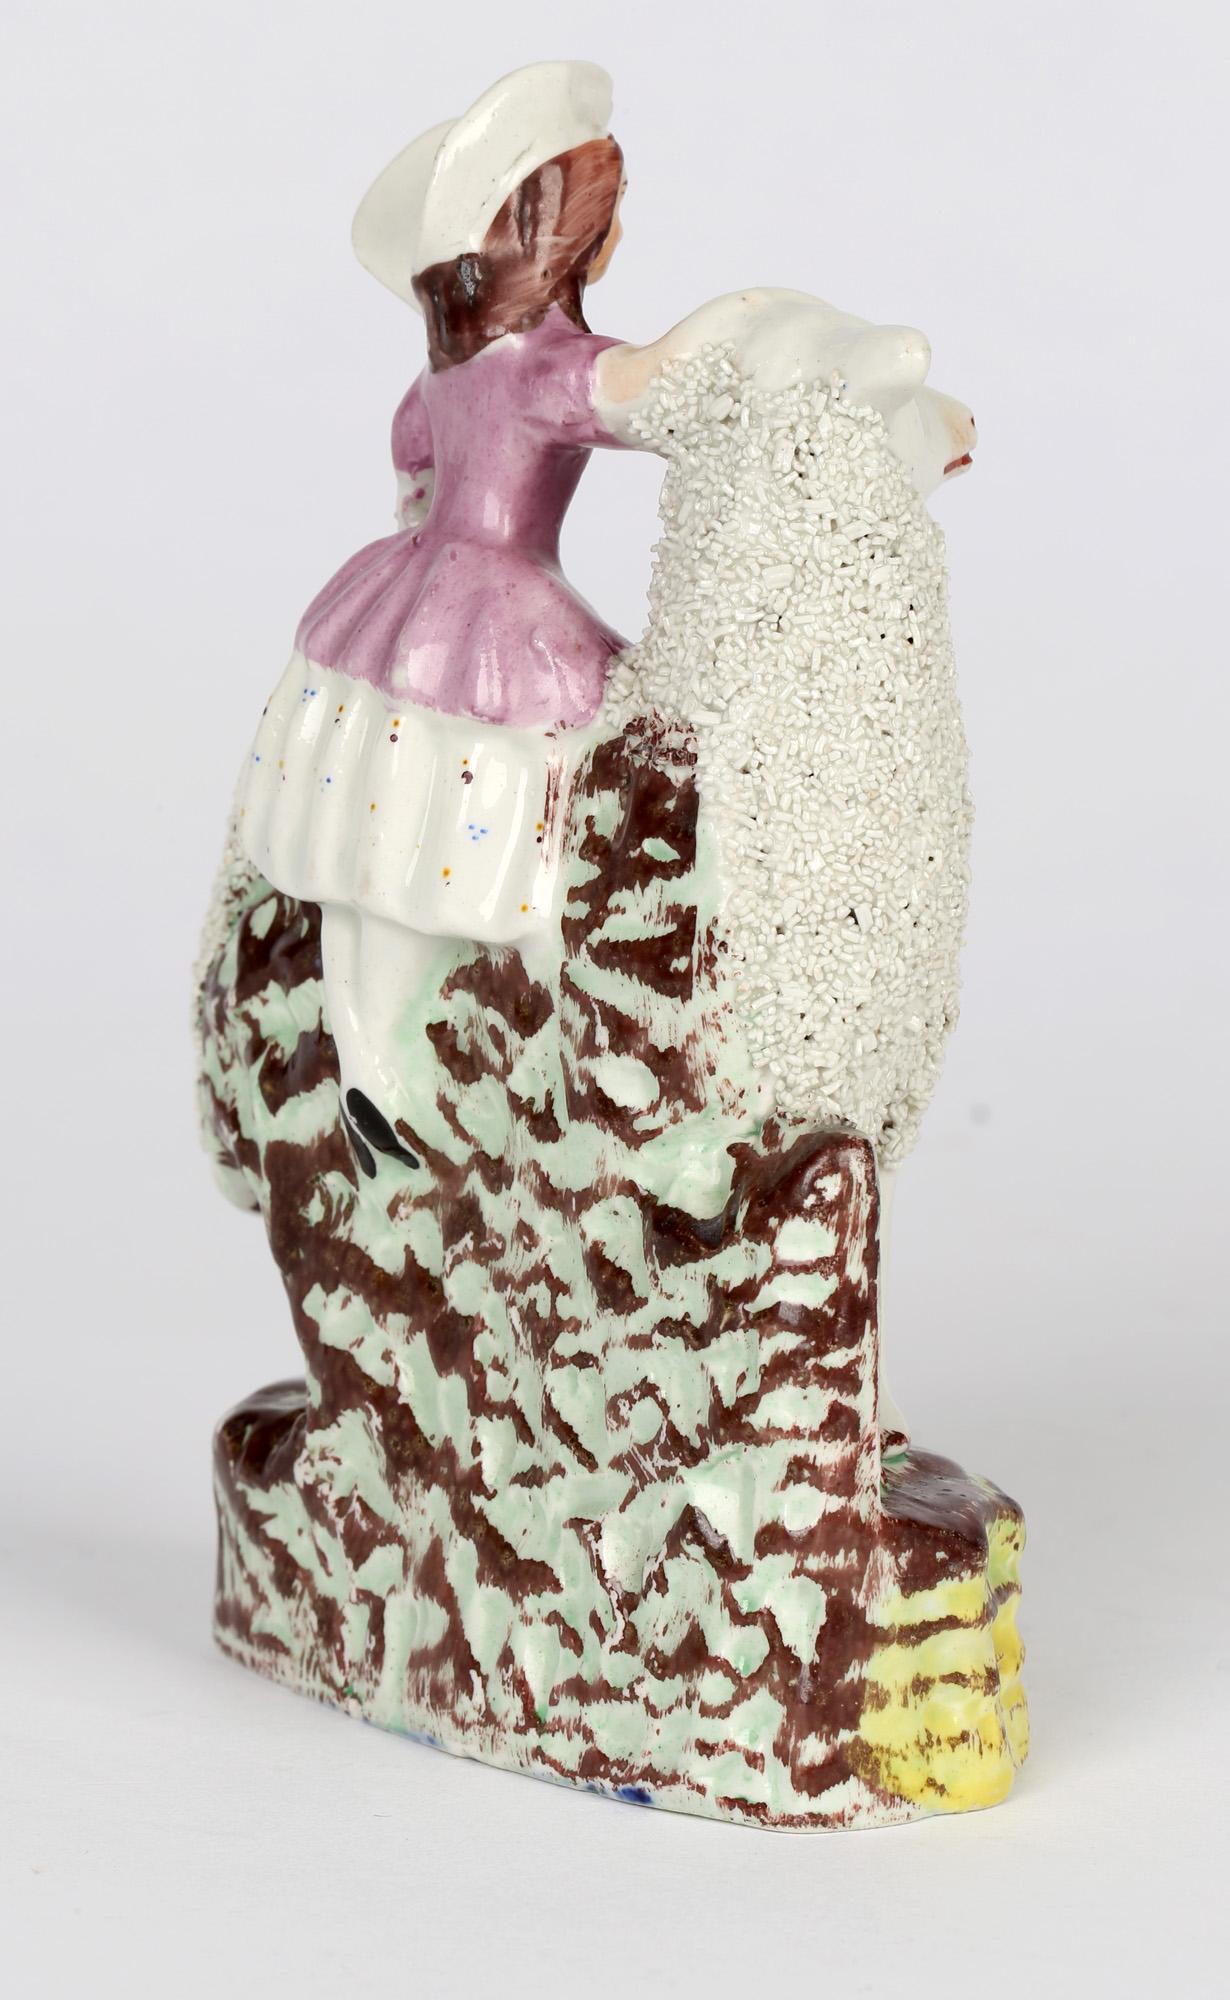 A fine and scarce antique English Staffordshire figure of a girl with a very large sheep dating from the mid 19th century. The figure stands on molded rockwork base with the girl standing behind the sheep with one hand resting on the head and the